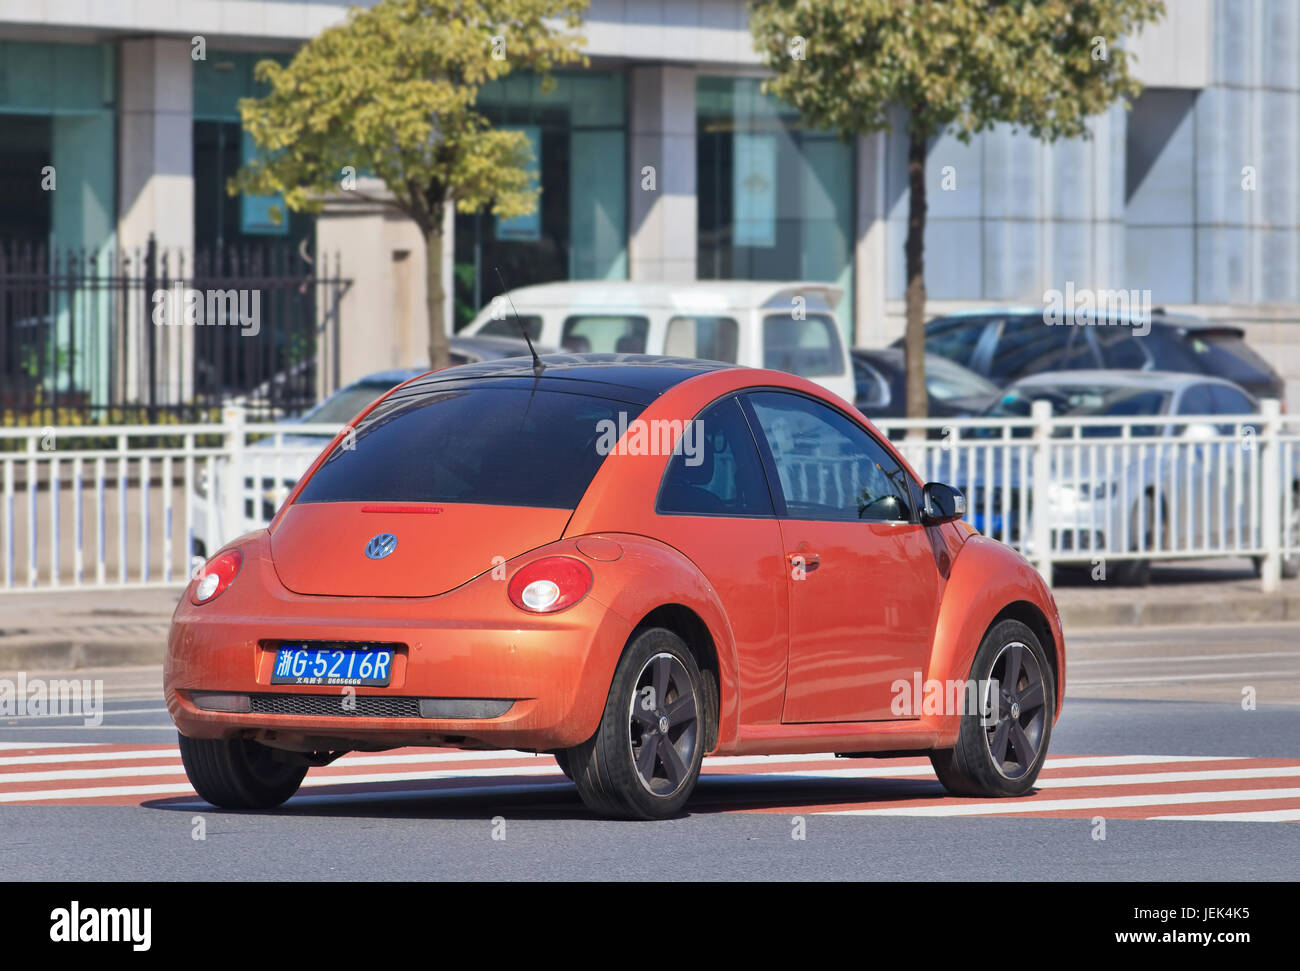 Orange Volkswagen Beetle. China is the place where VW CEO Matthias Mueller can enjoy brief respite from its worldwide diesel emissions scandal. Stock Photo